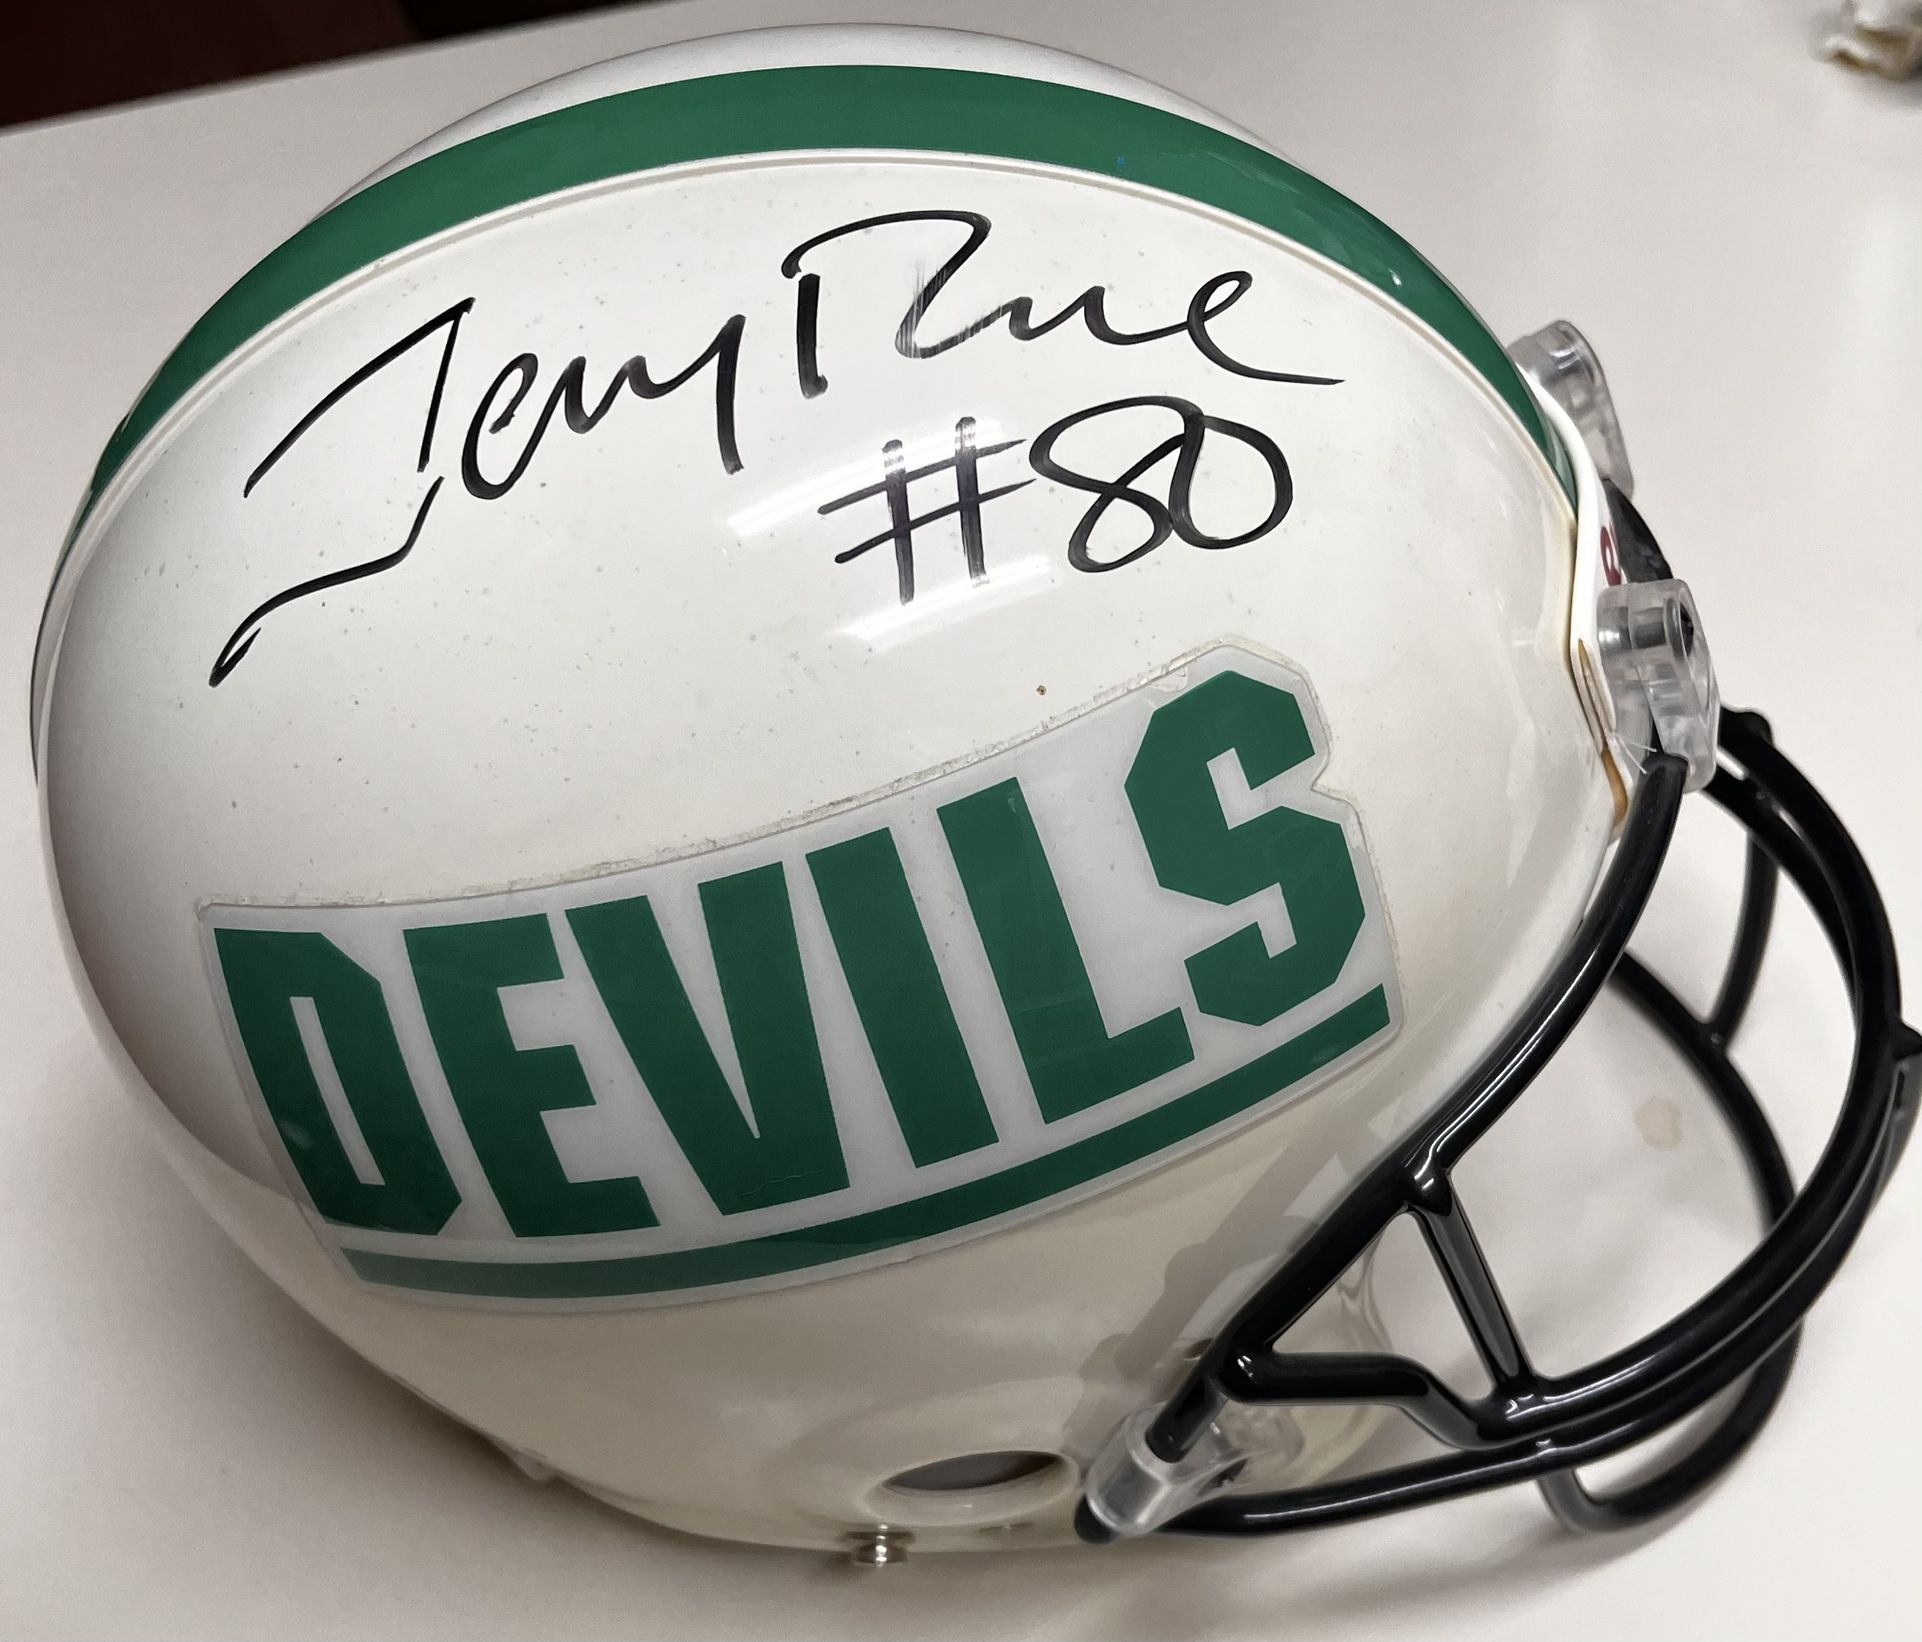 Jerry Rice Signed Helmet Mississippi State Delta Devils Full Size Authentic